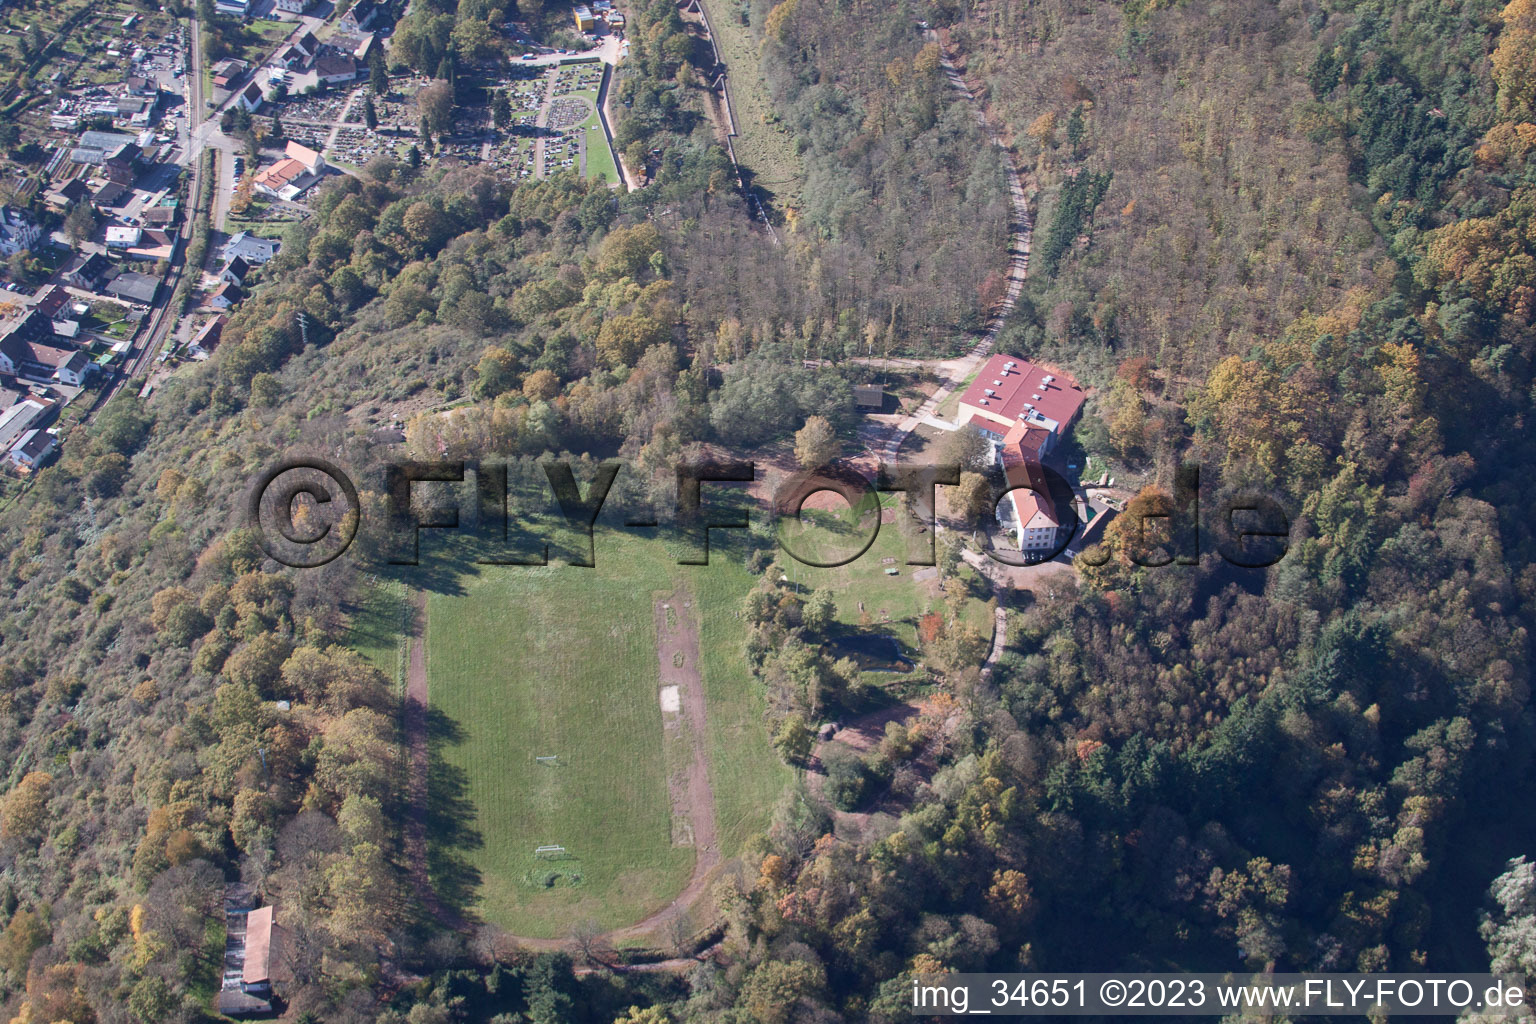 Aerial view of Palatinate Gymnastics Youth Home in Annweiler am Trifels in the state Rhineland-Palatinate, Germany